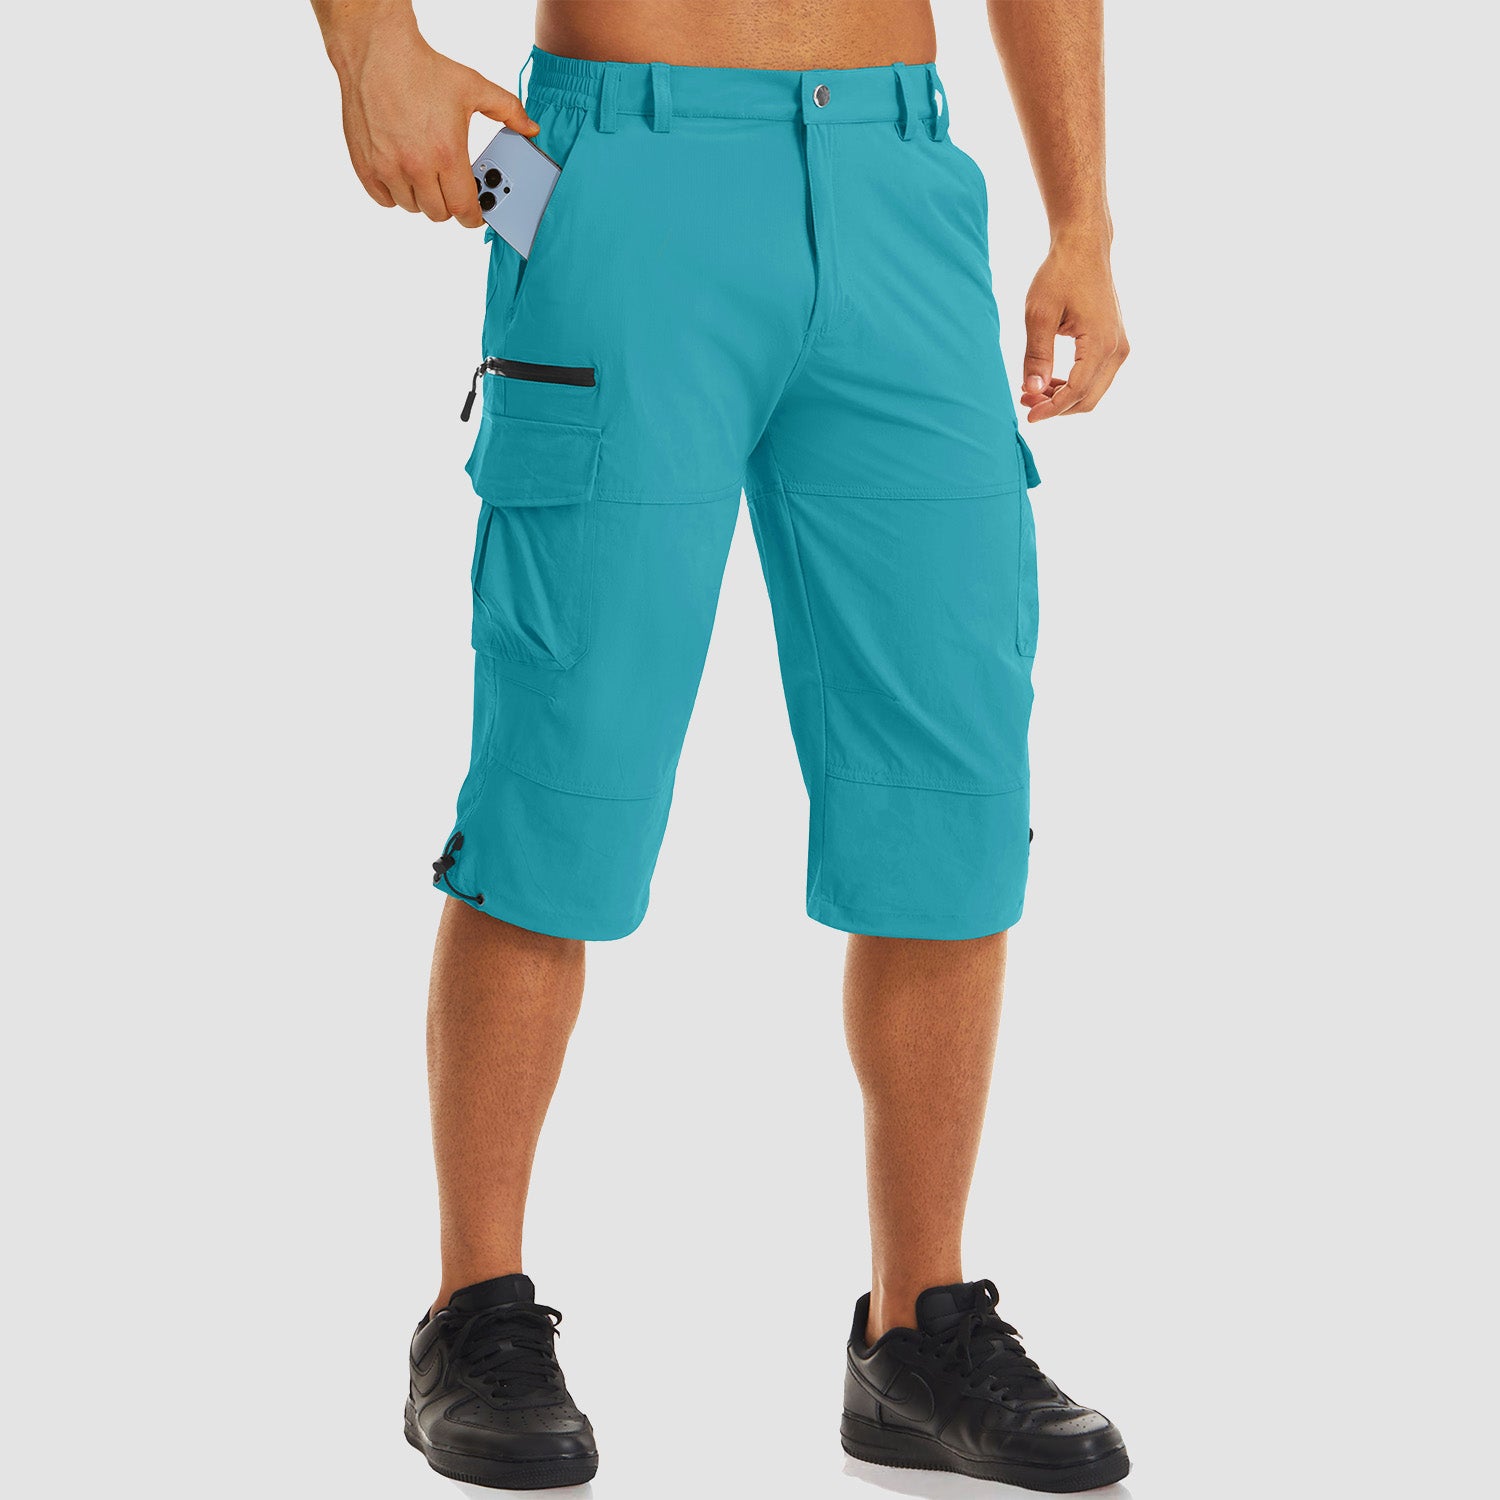 【Buy 4 Get the 4th Free！】Men's Workout Gym Shorts with 7 Pockets Quick Dry 3/4 Capri